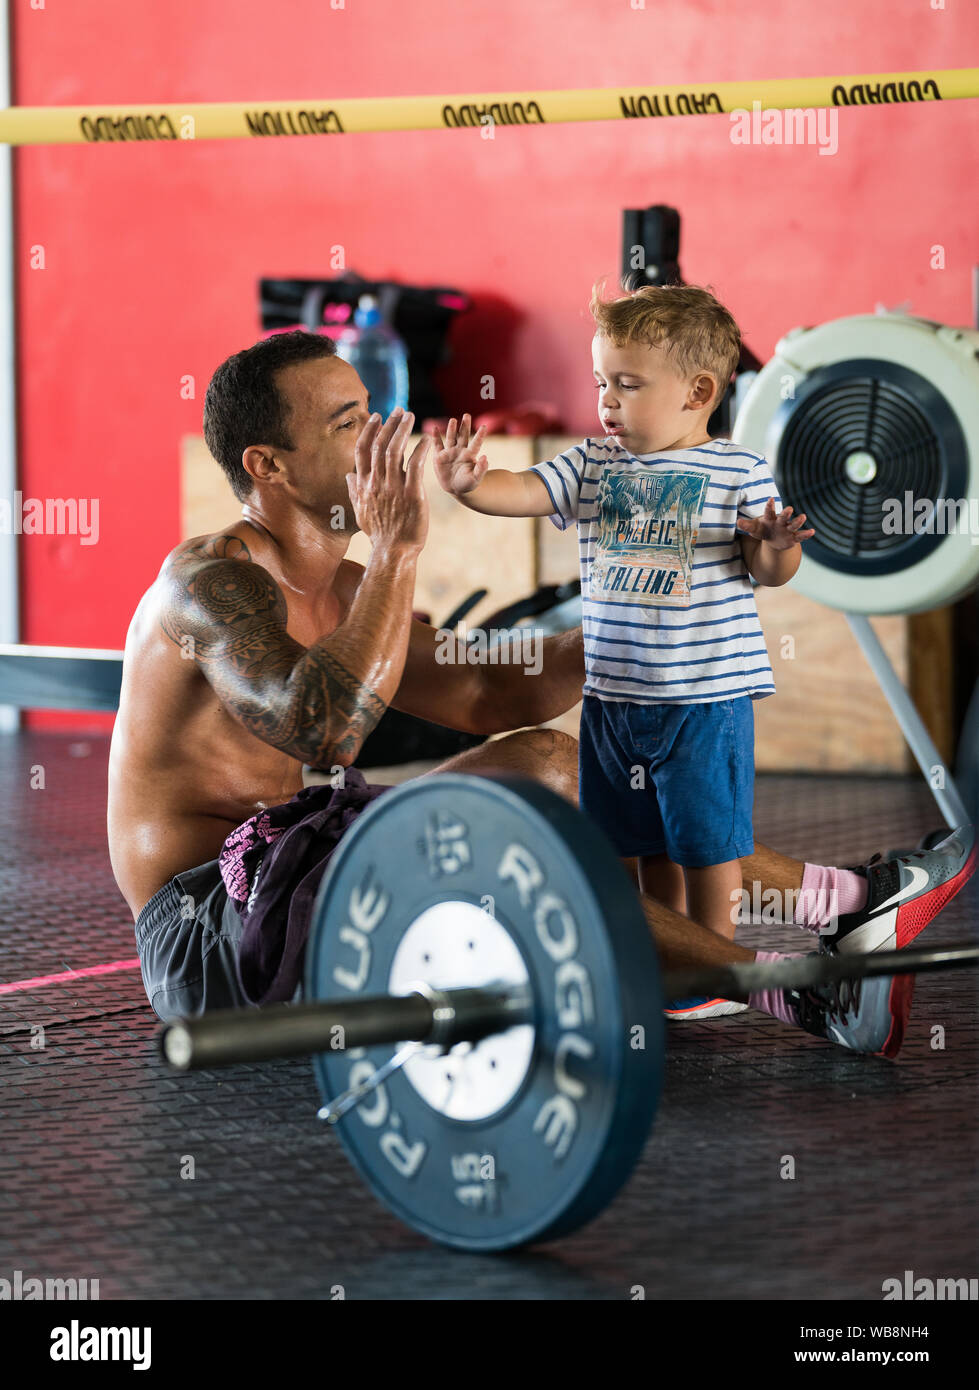 A mixed race male athlete gives a high five to his mixed race child after a weightlifting competition in the gym Stock Photo